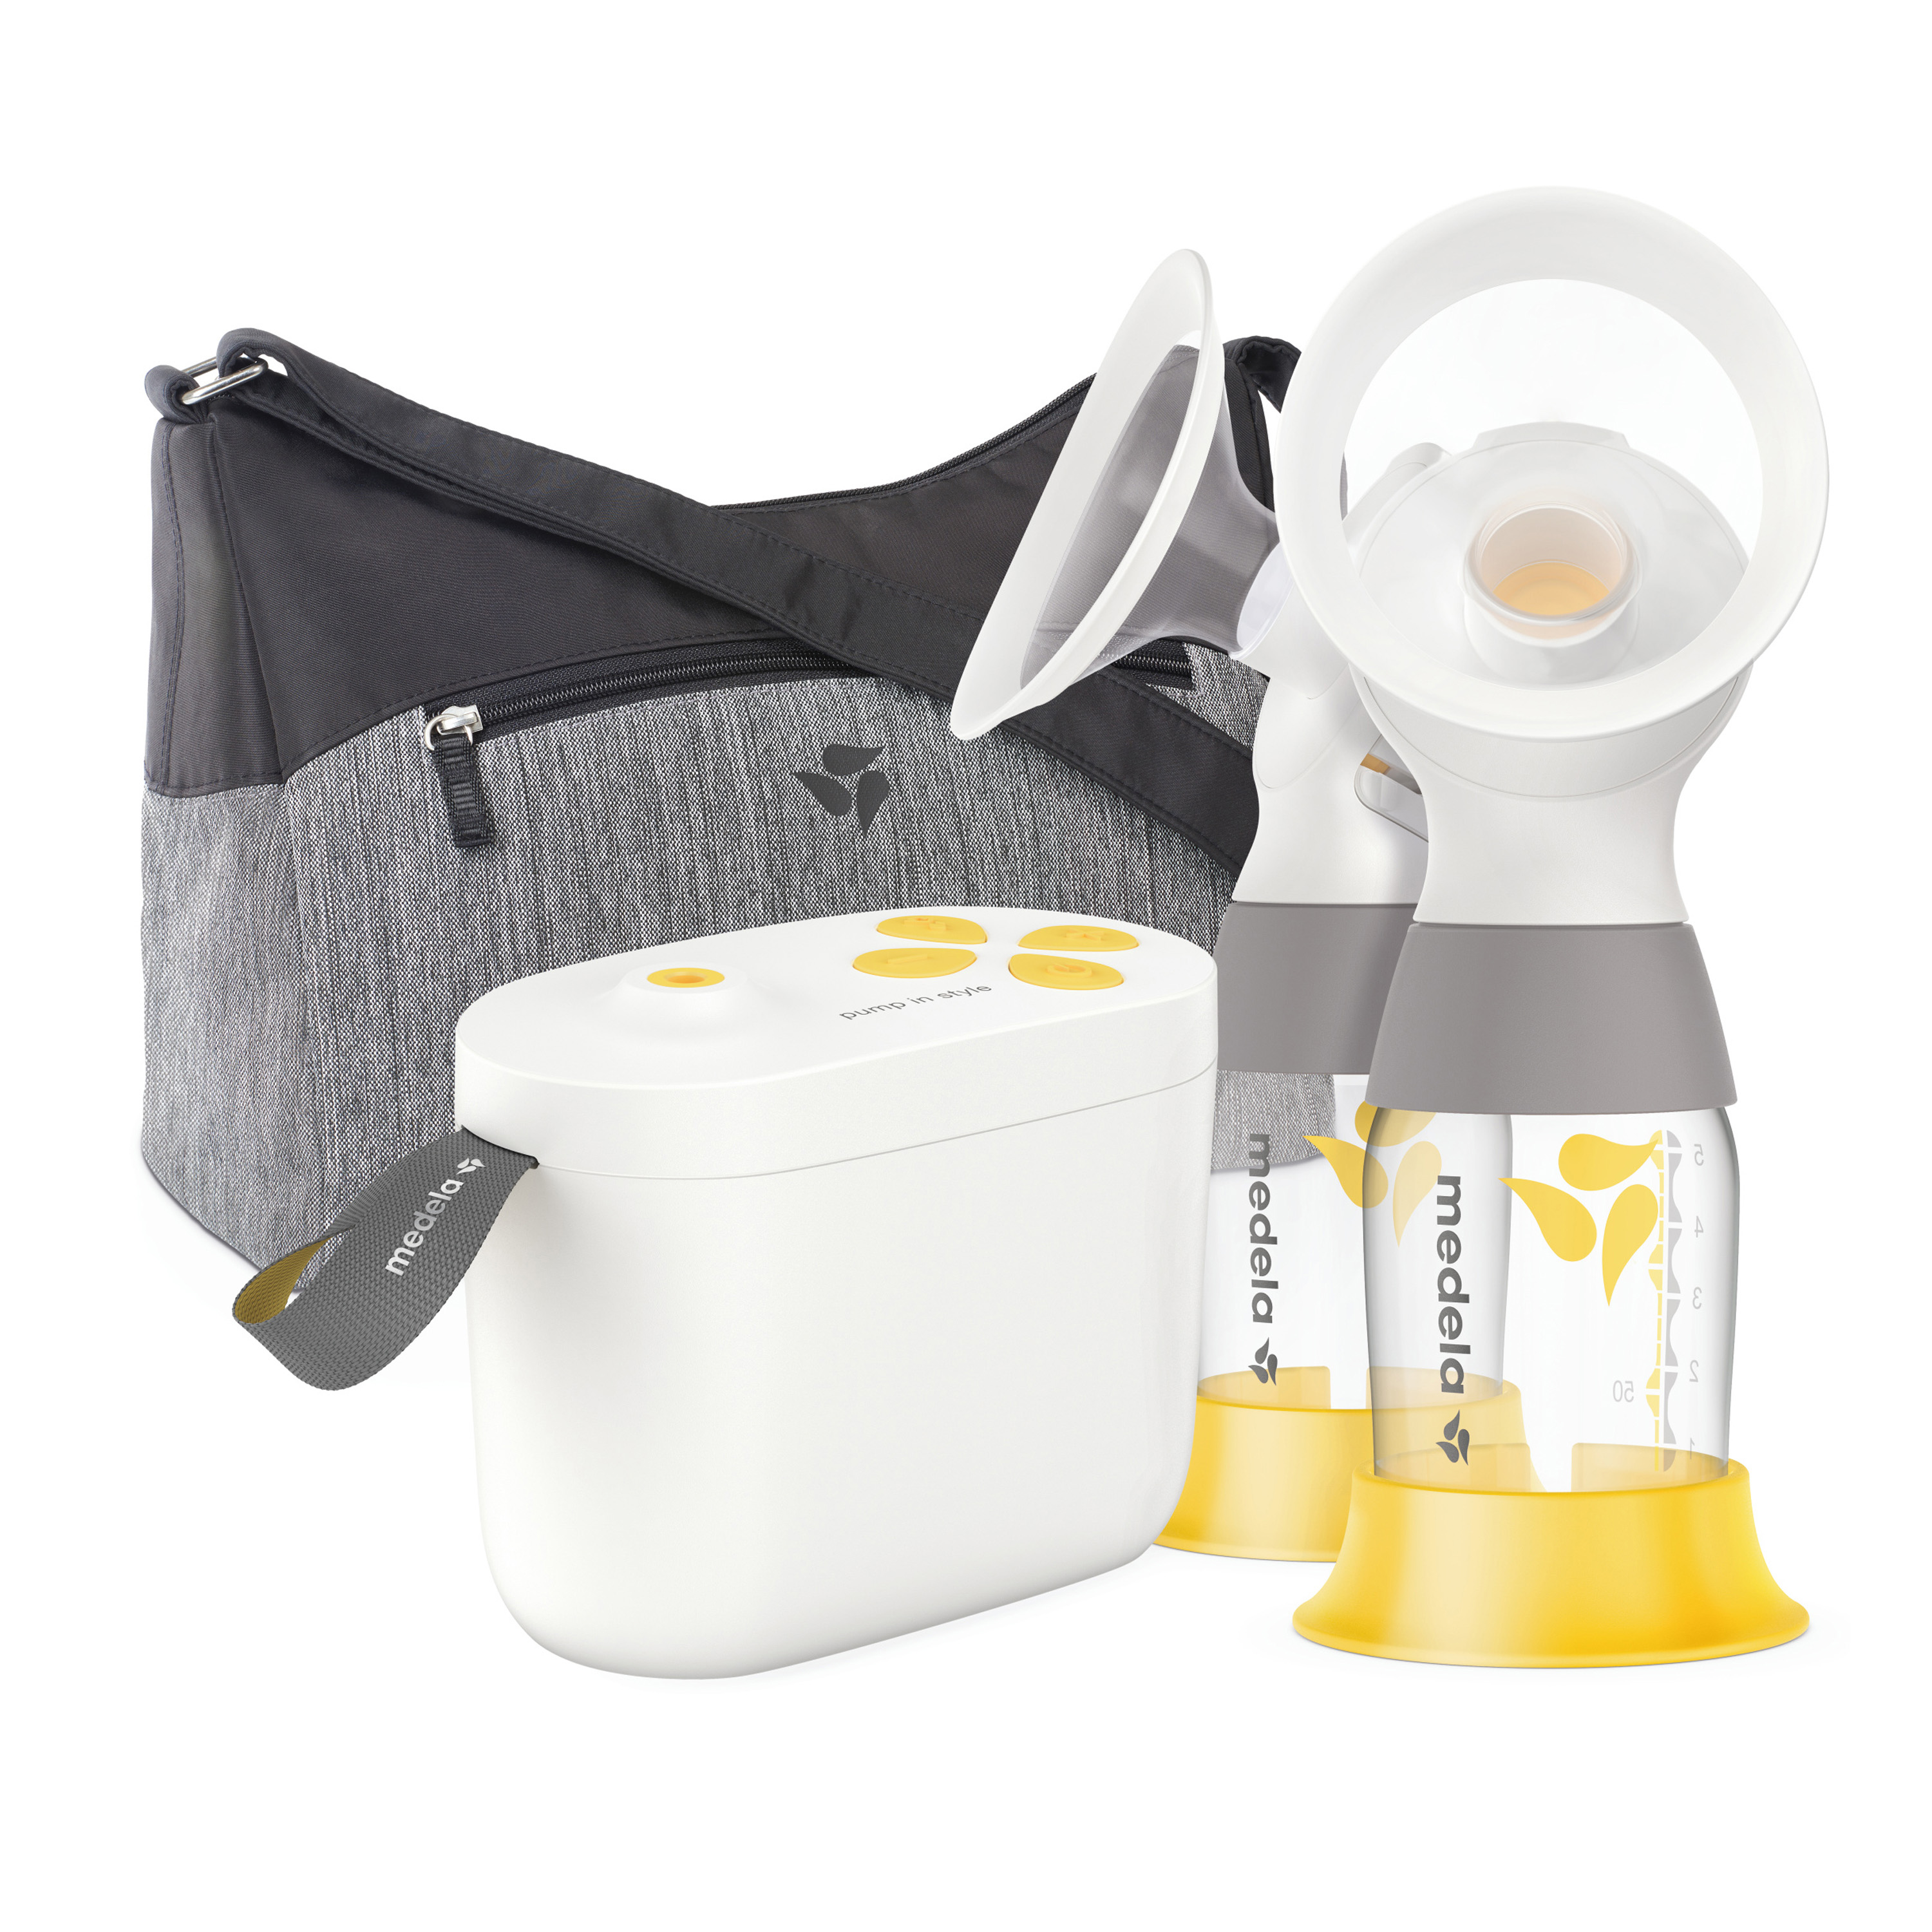 Medela Pump in Style with MaxFlow Double Electric Breast Pump Set, 22 Piece Kit - image 1 of 11